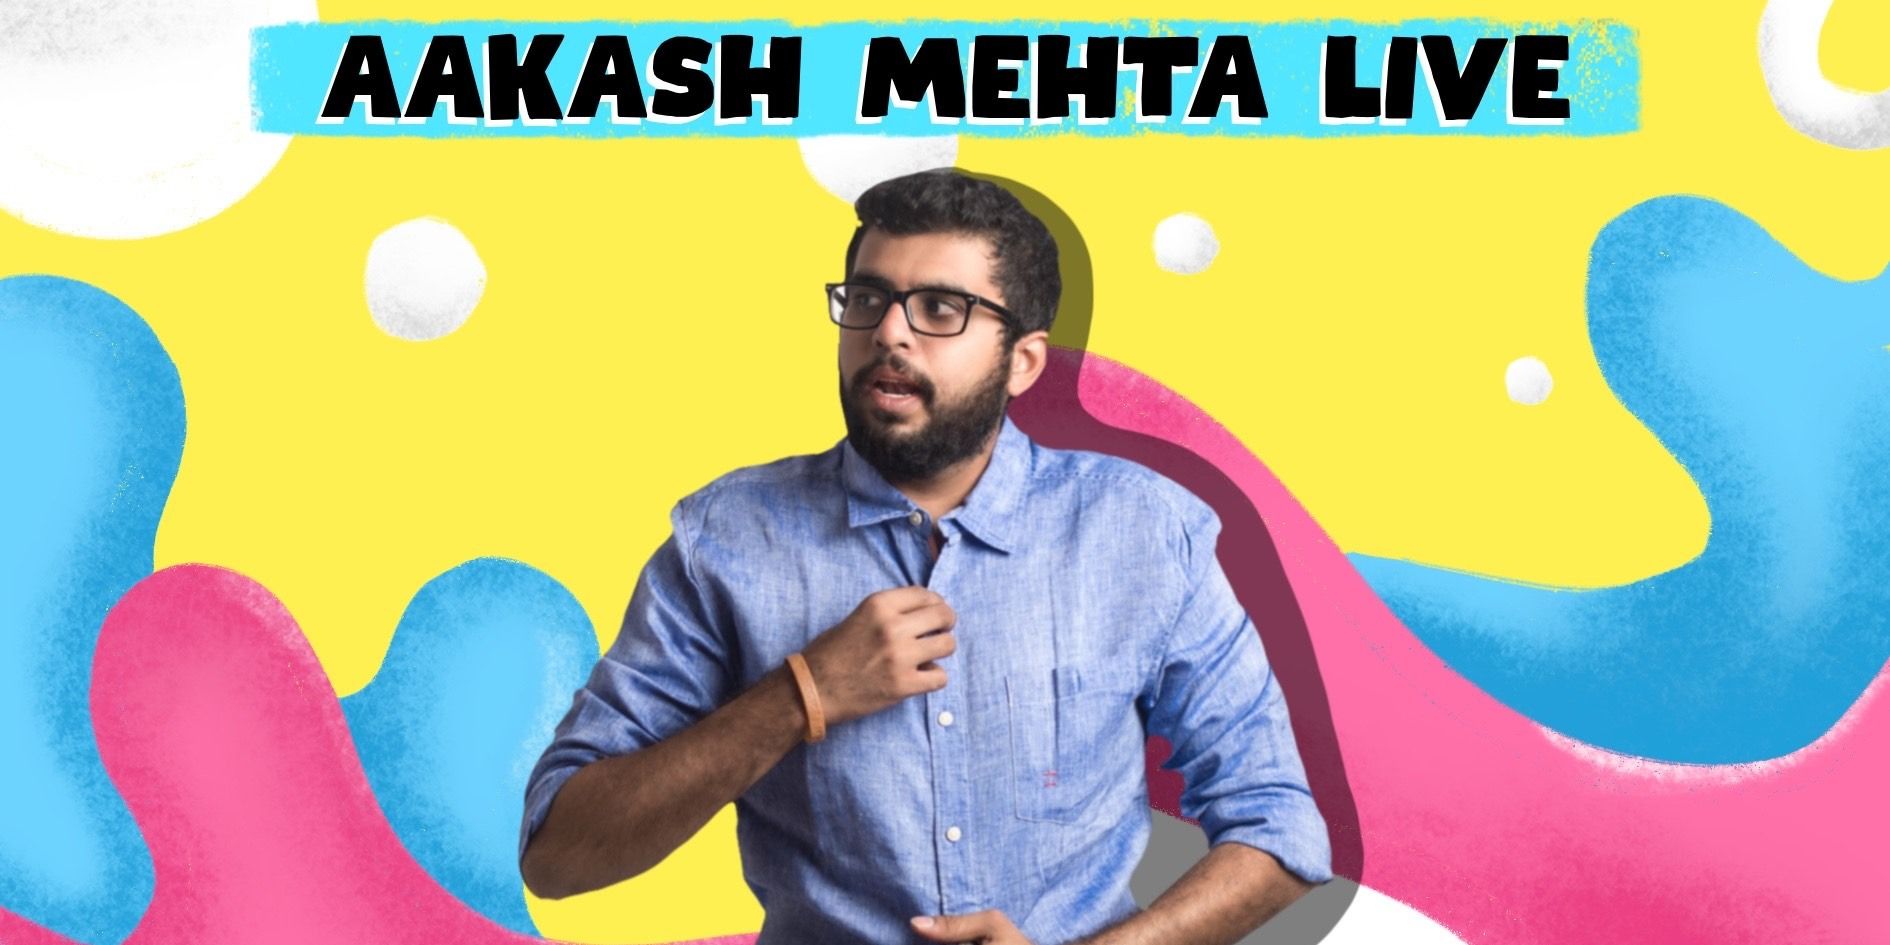 Aakash Mehta Live (Comedy Show) in Pune